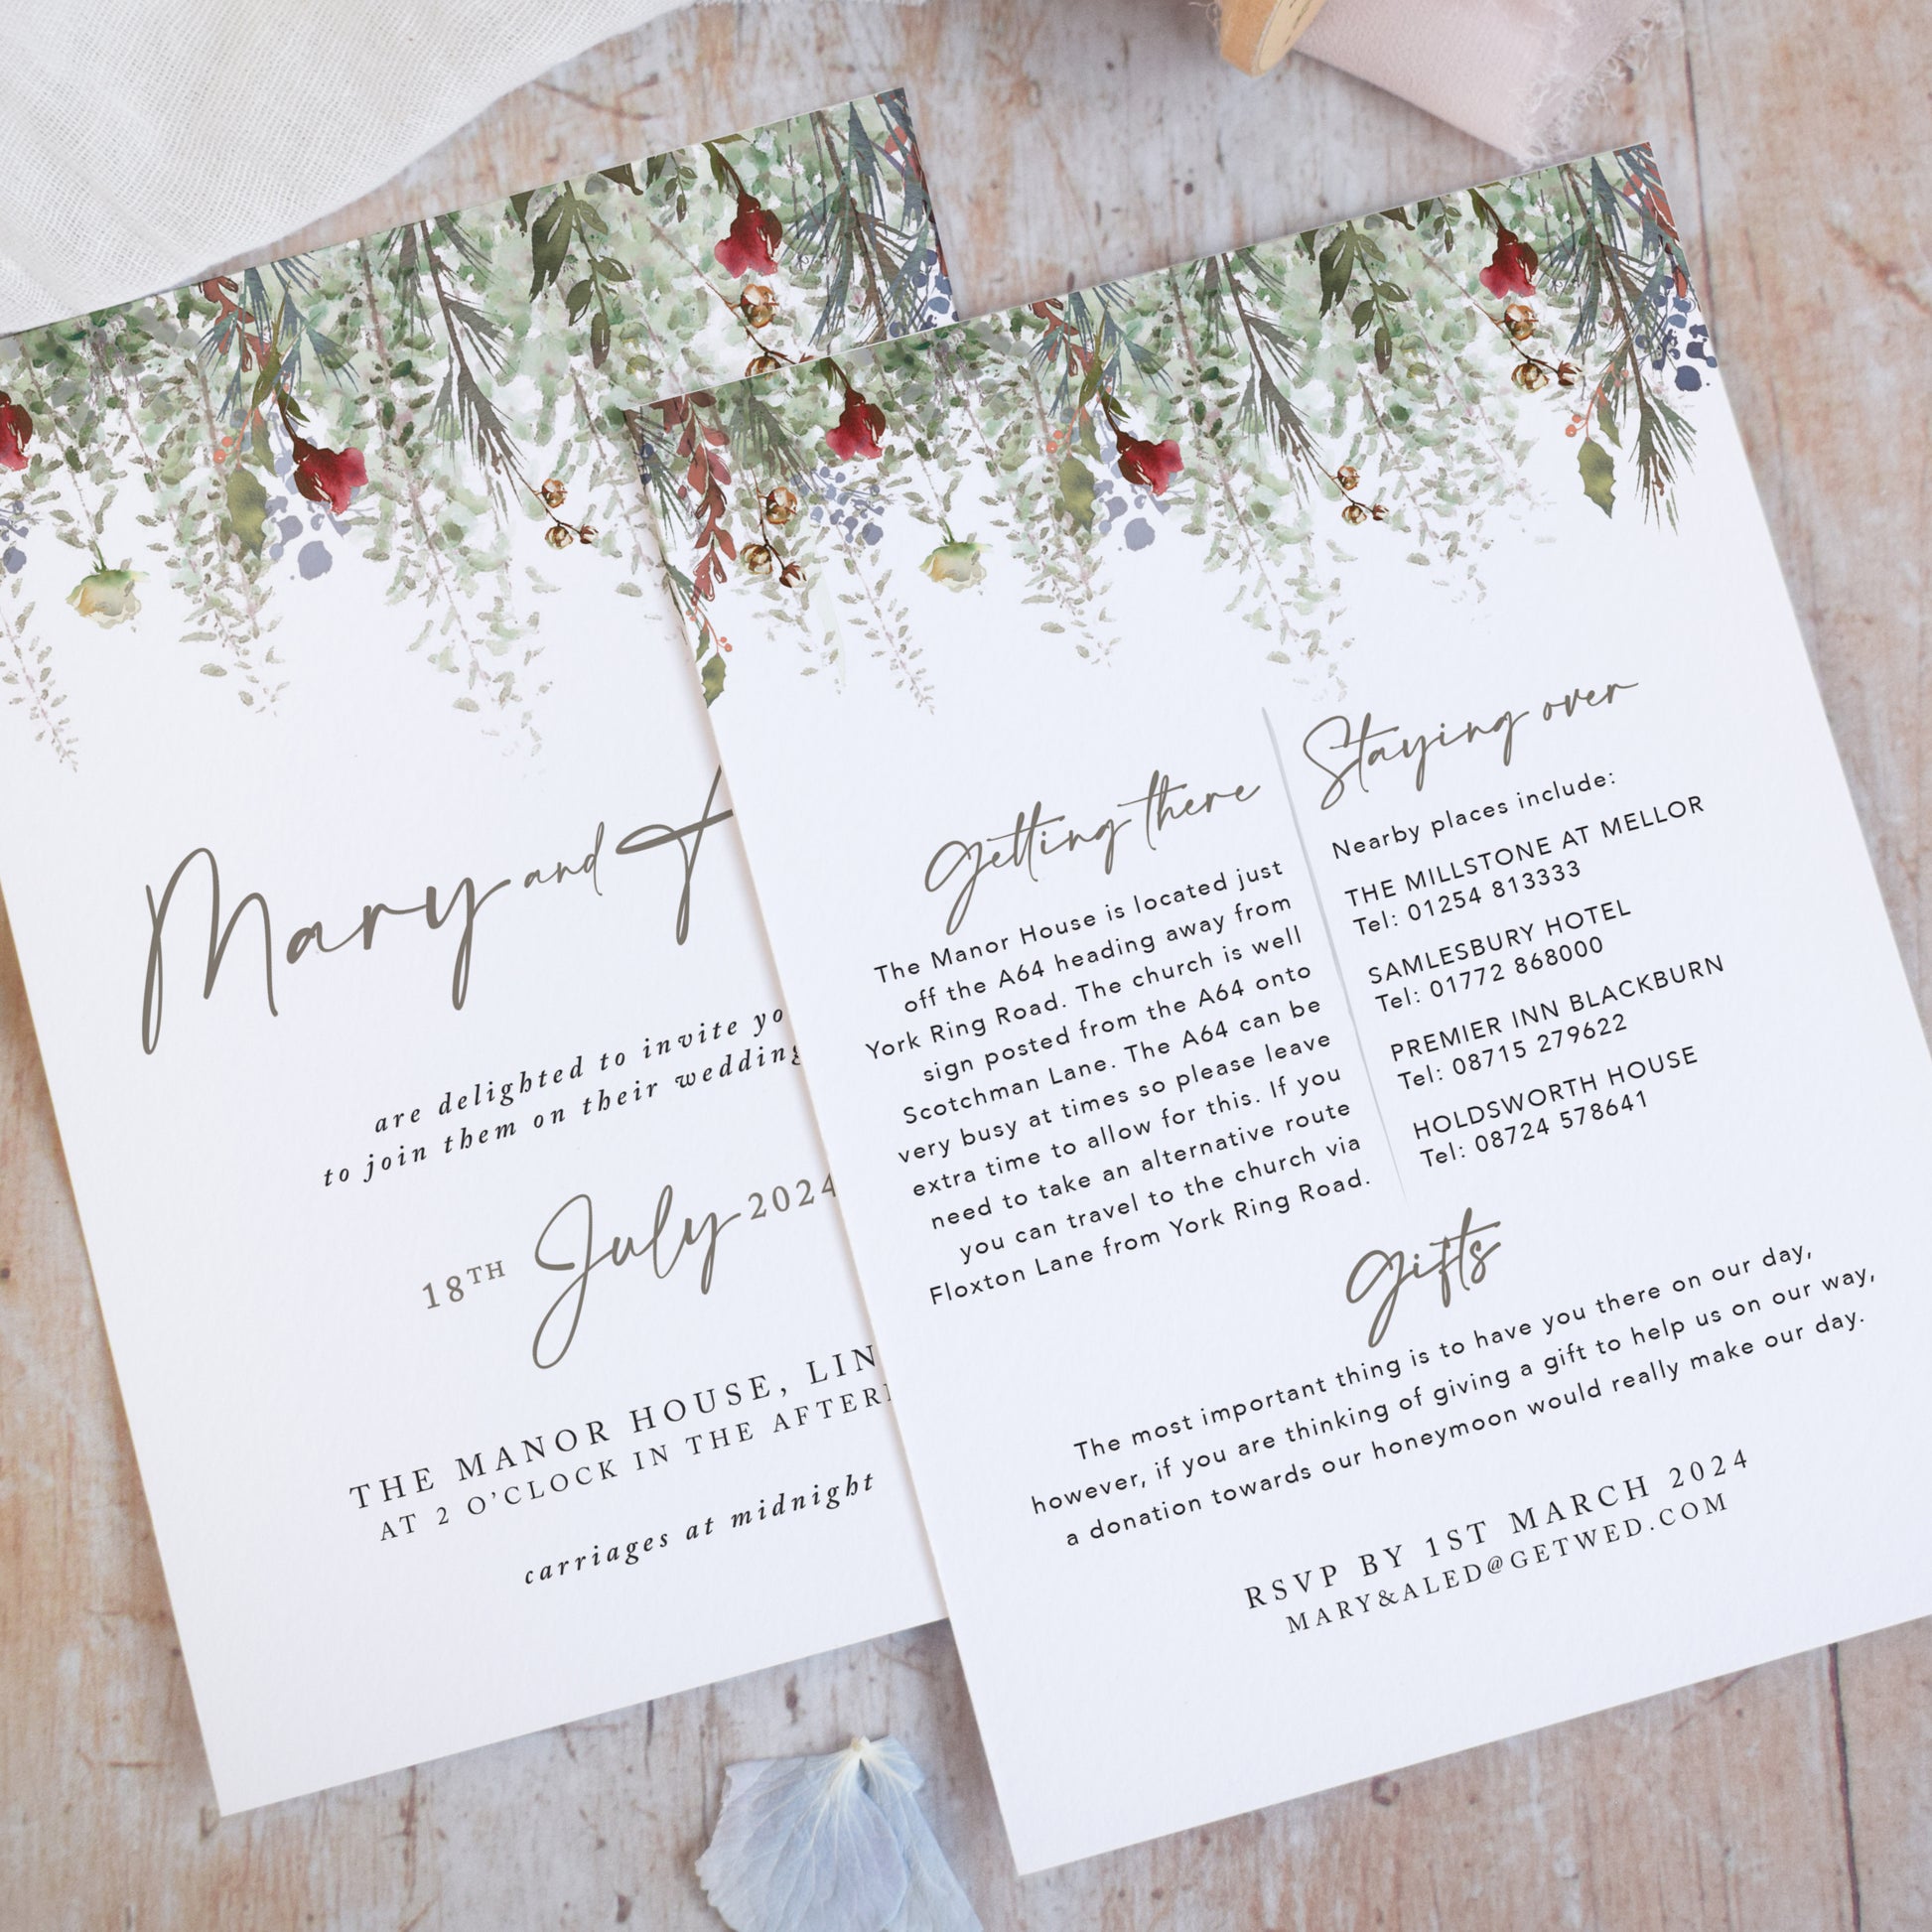 sage green and red wedding invitations for a Christmas wedding